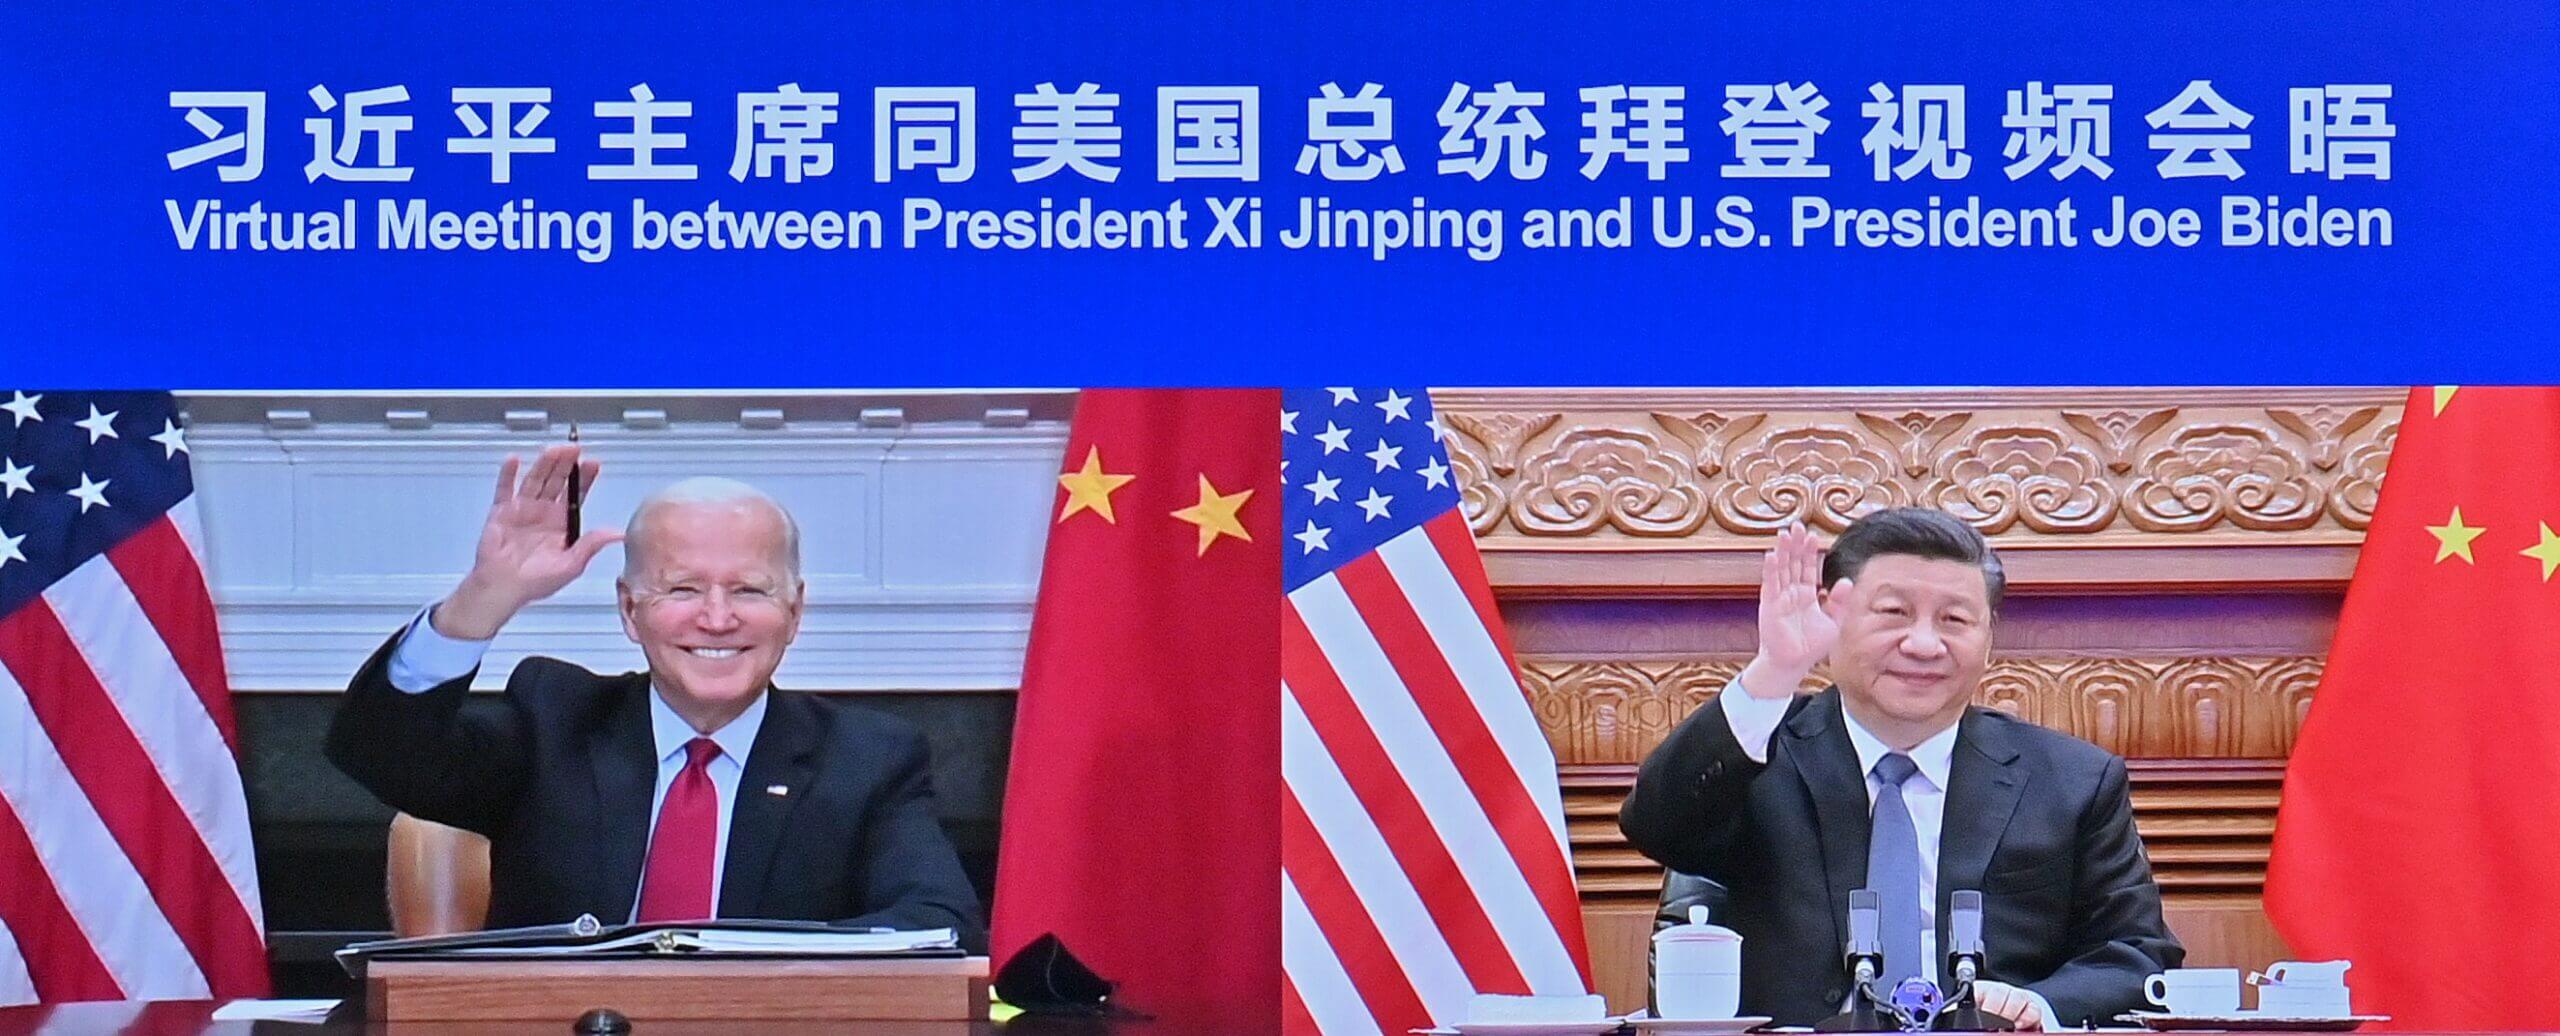 A Realistic Understanding of the PRC Threat Must Inform U.S. Policy